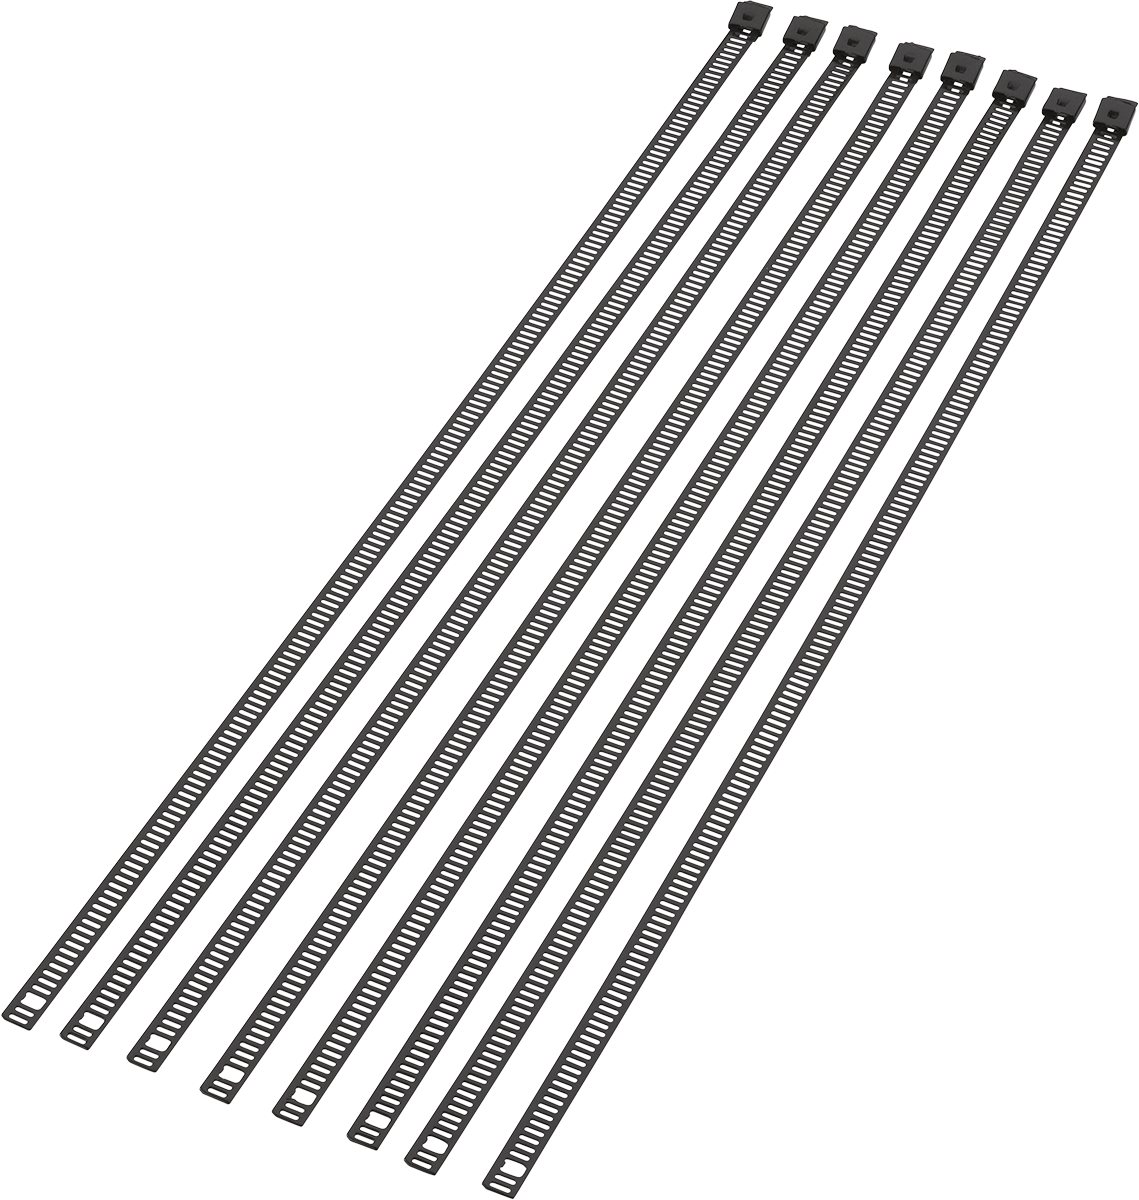 MOOSE RACING HARD-PARTS LADDER-STYLE CABLE TIES CABLE TIE BLACK 14" 8PK